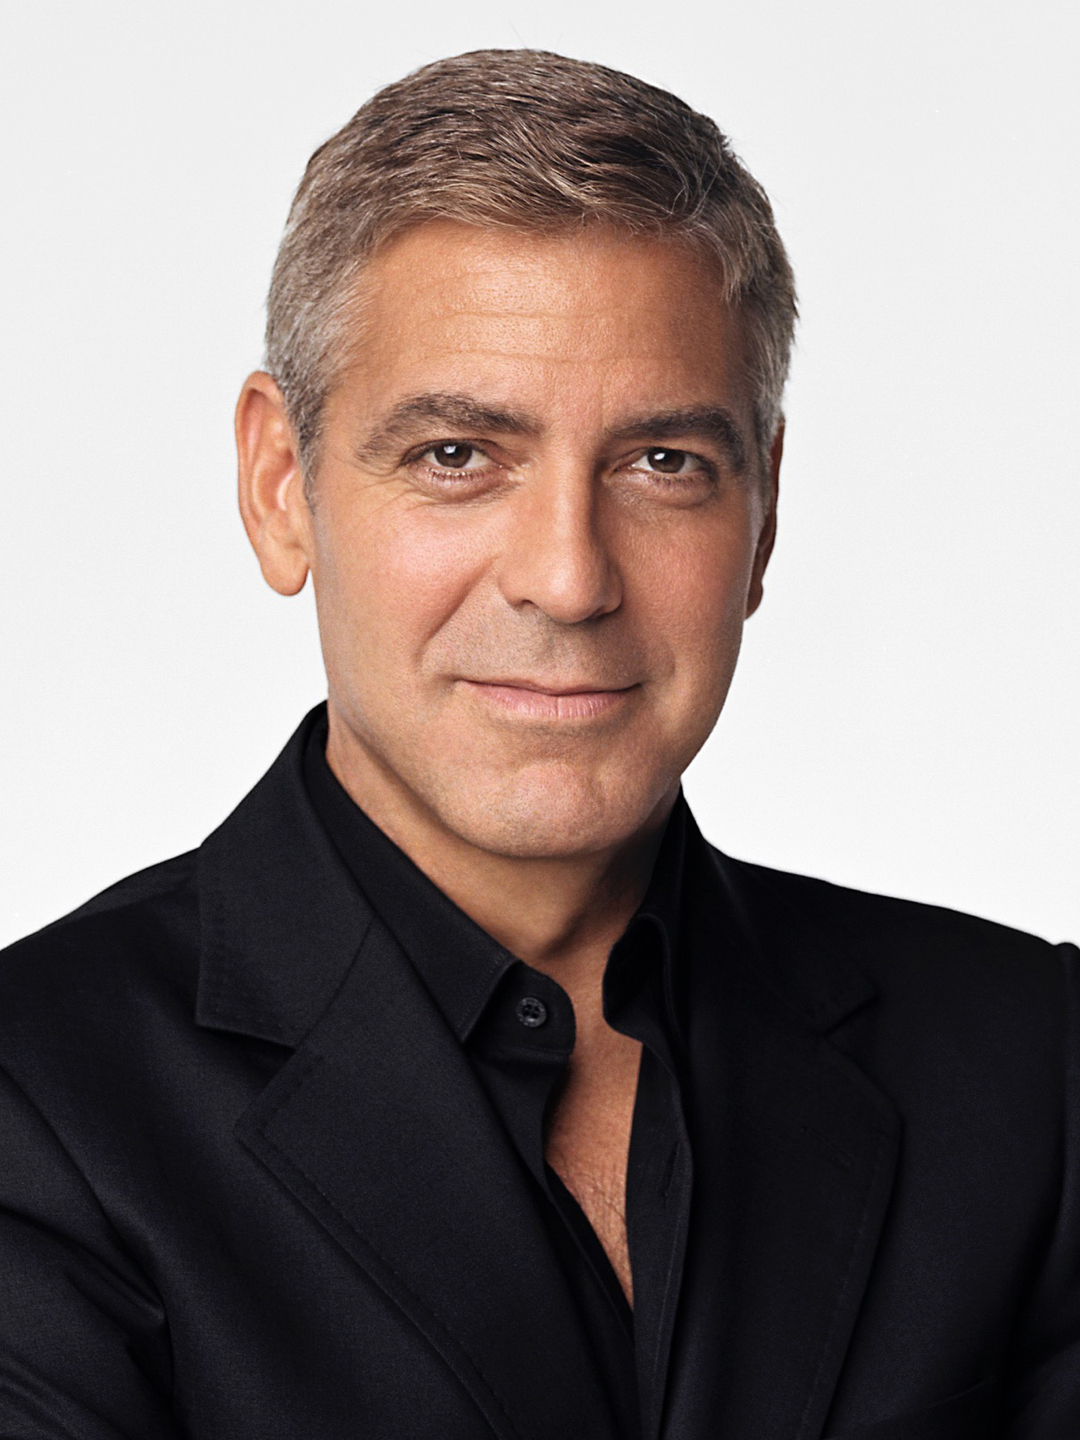 George Clooney interesting facts